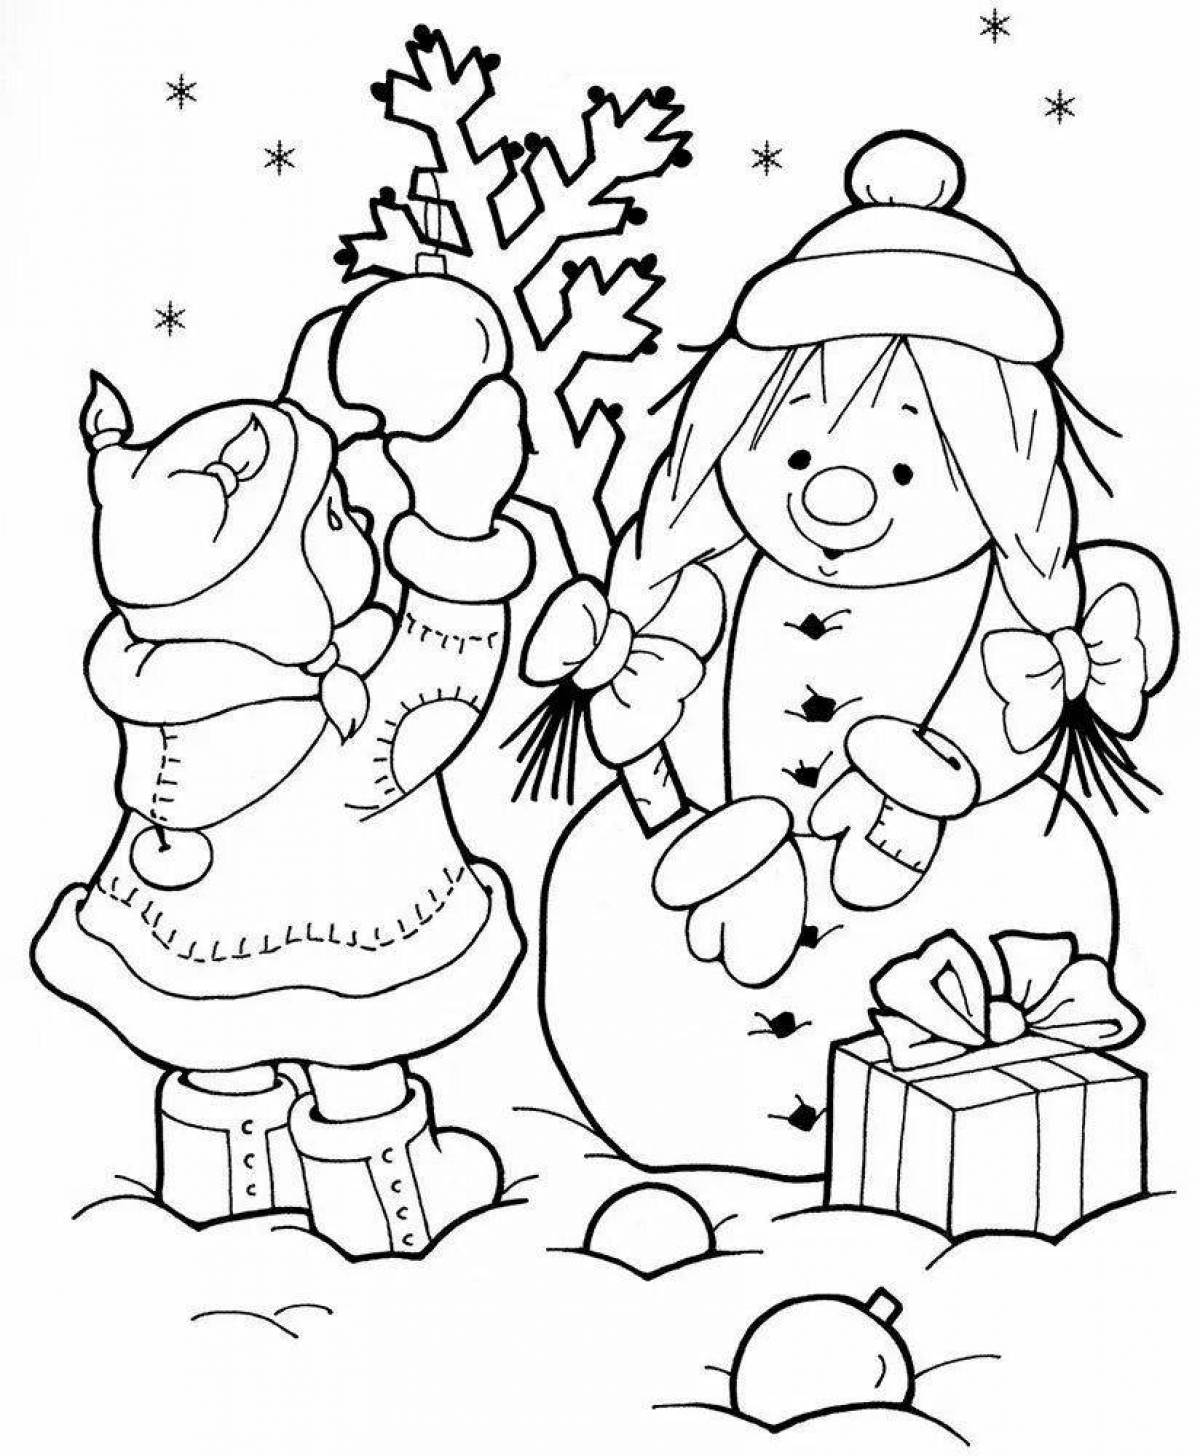 Sparkling Christmas funny coloring book